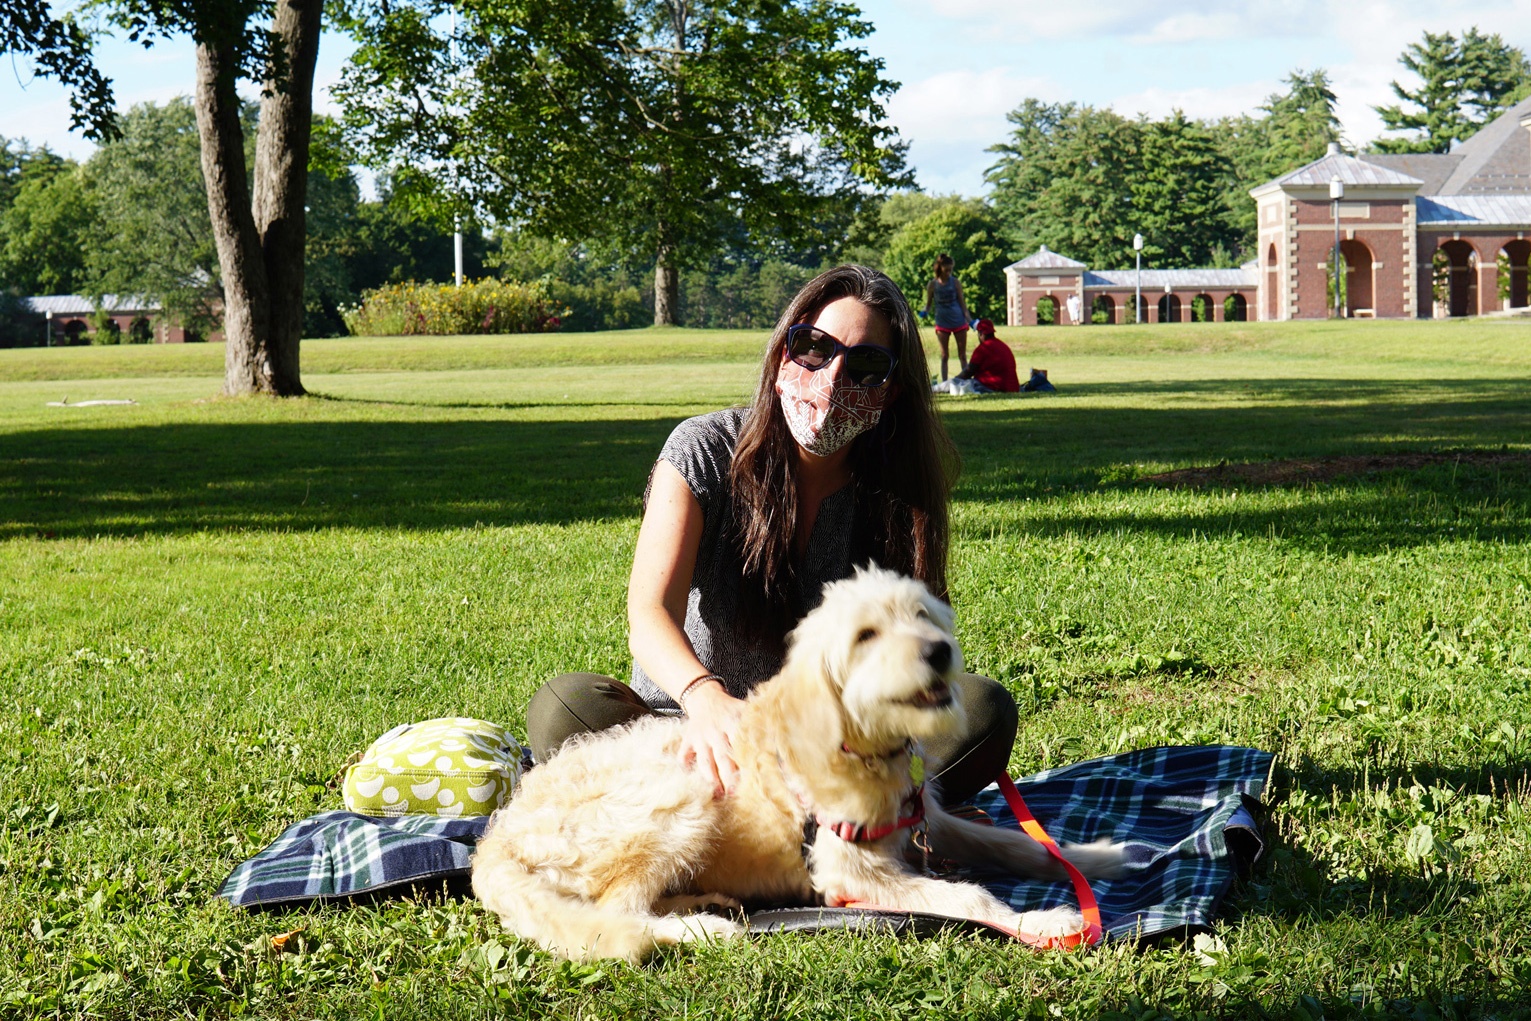 A light-skinned woman with dark hair wearing sunglasses and a red mask with white leaves and lines printed on it petting a cream dog sitting on a blanket on grass.